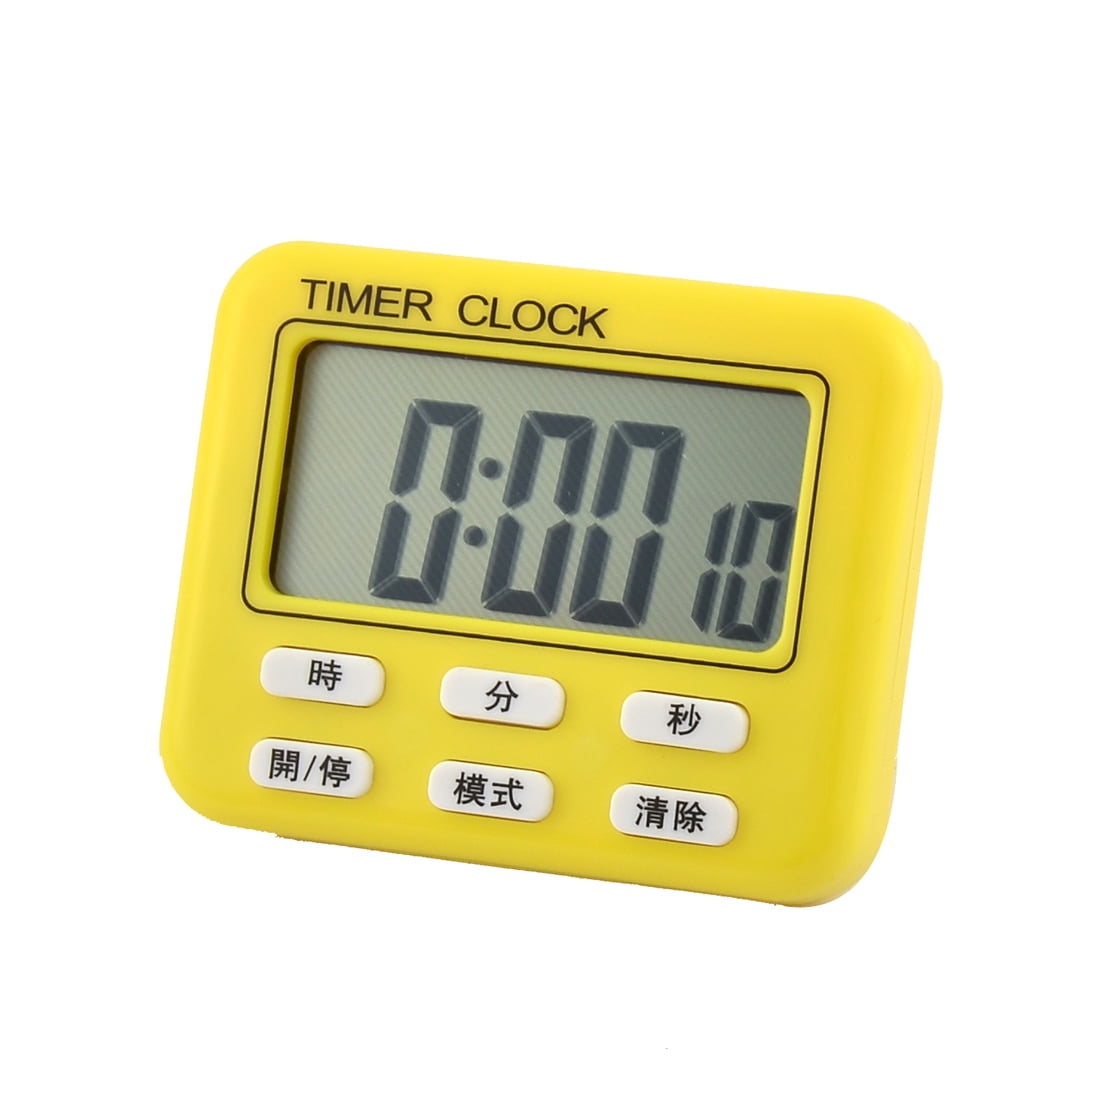 ABS Kitchen Battery Powered LCD Digital Count Down Up Timer Clock Alarm Yellow1100 x 1100